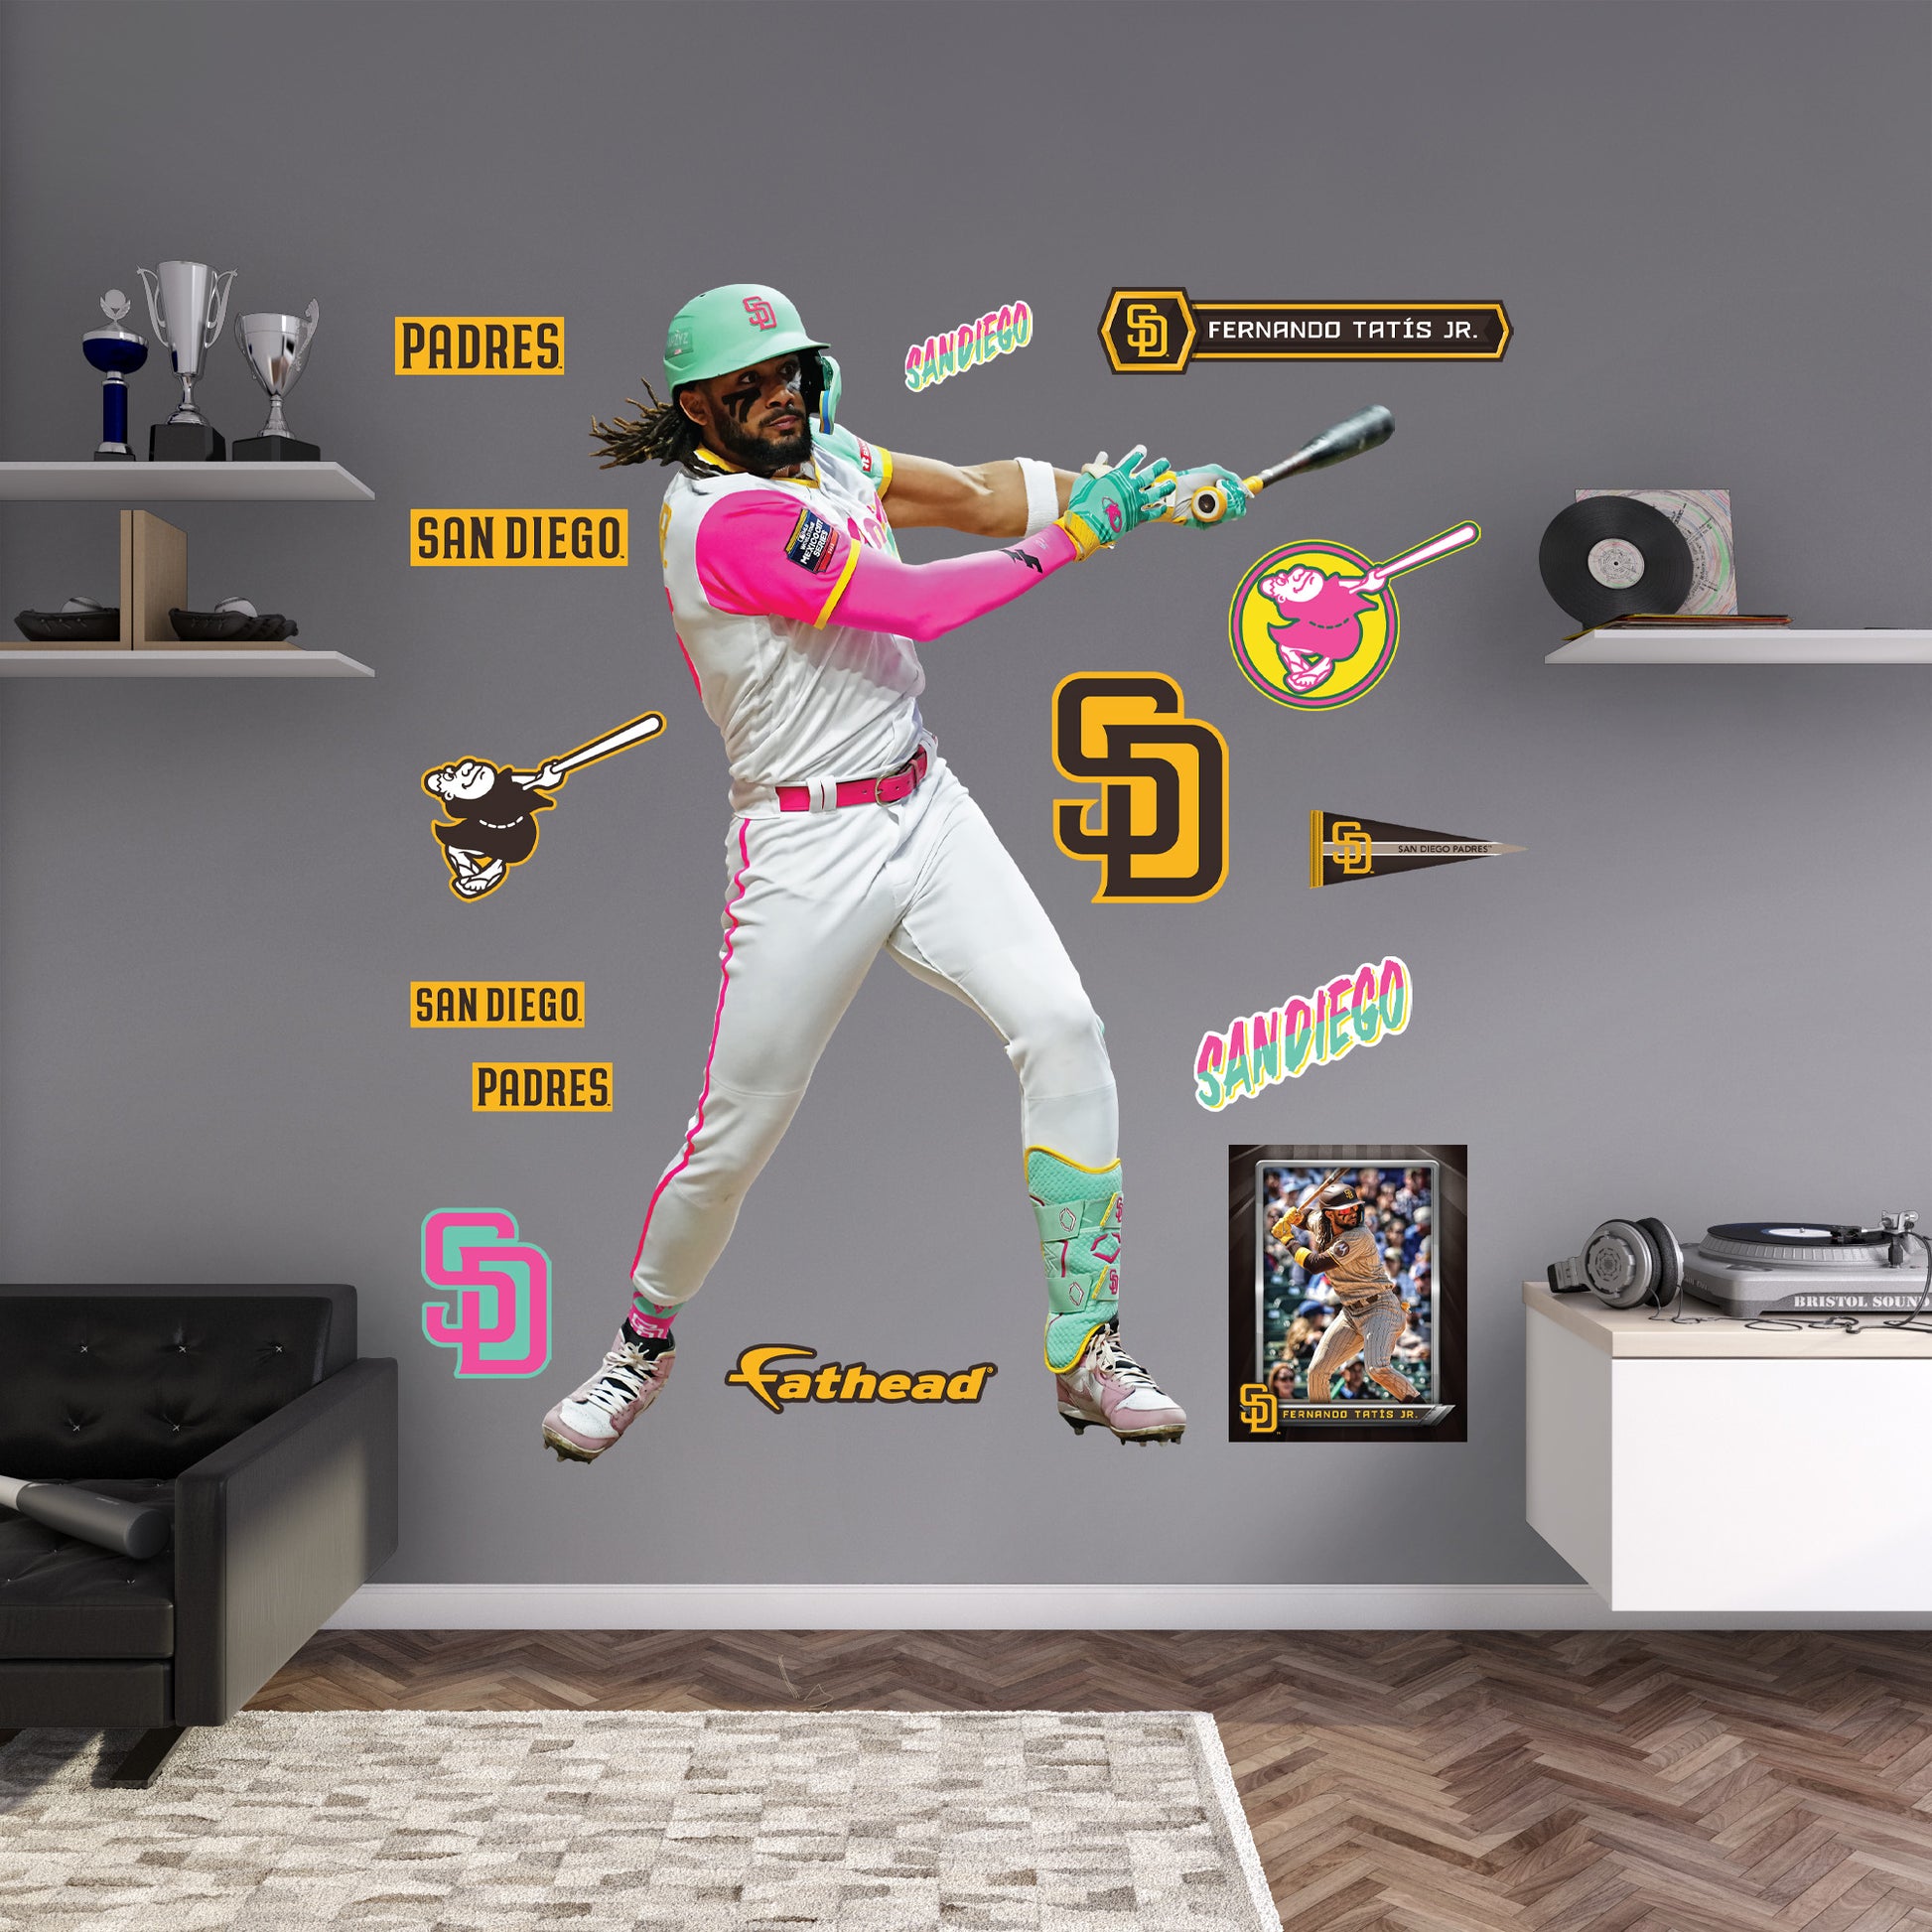 San Diego Padres' City Connect uniforms take inspiration from California  iconography